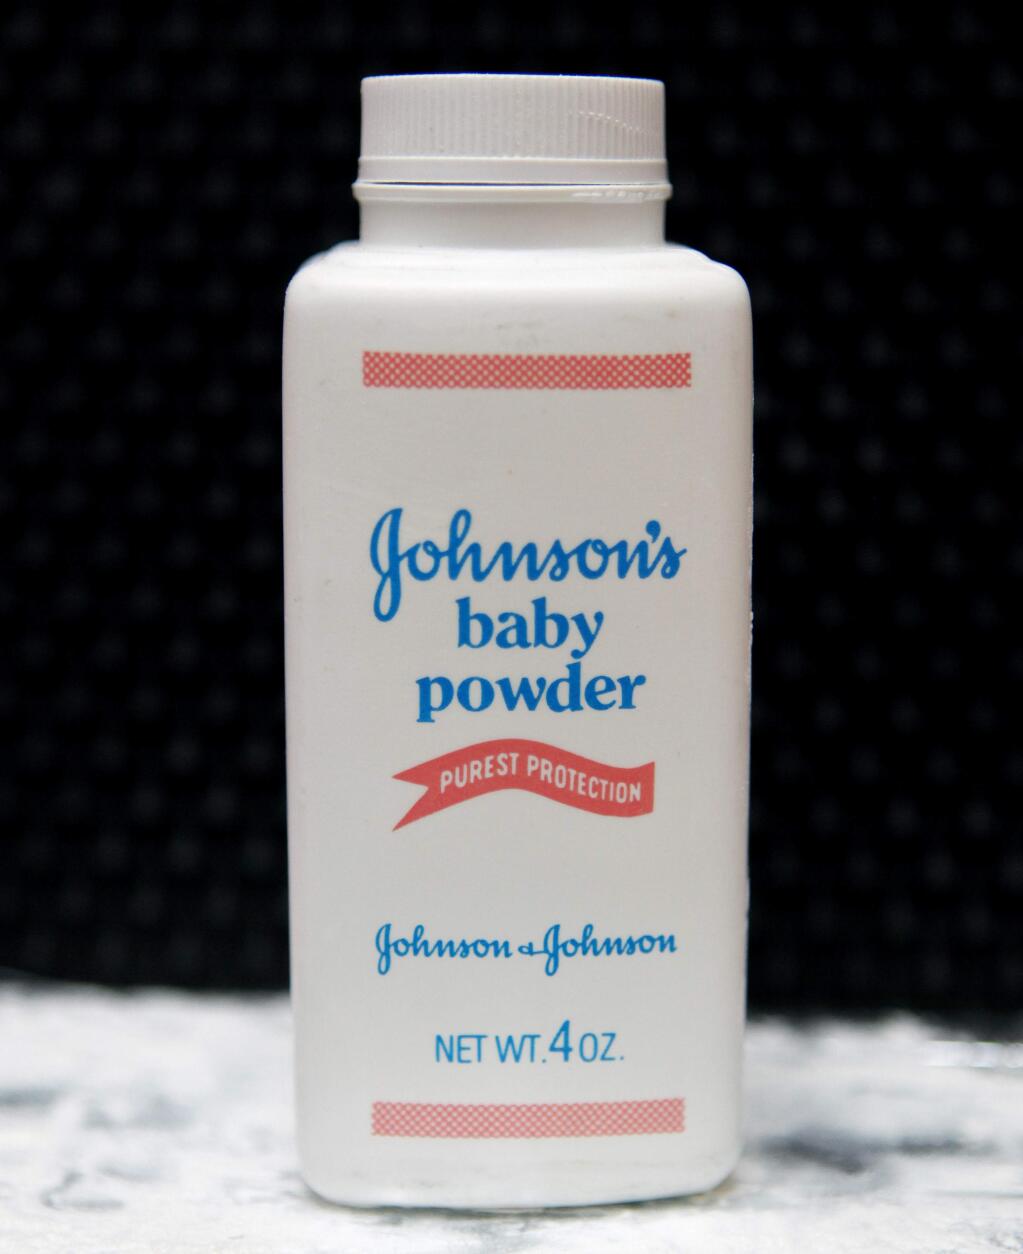 FILE - In this April 15, 2011, file photo, a bottle of Johnson's baby powder is displayed in San Francisco. (AP Photo/Jeff Chiu, File)